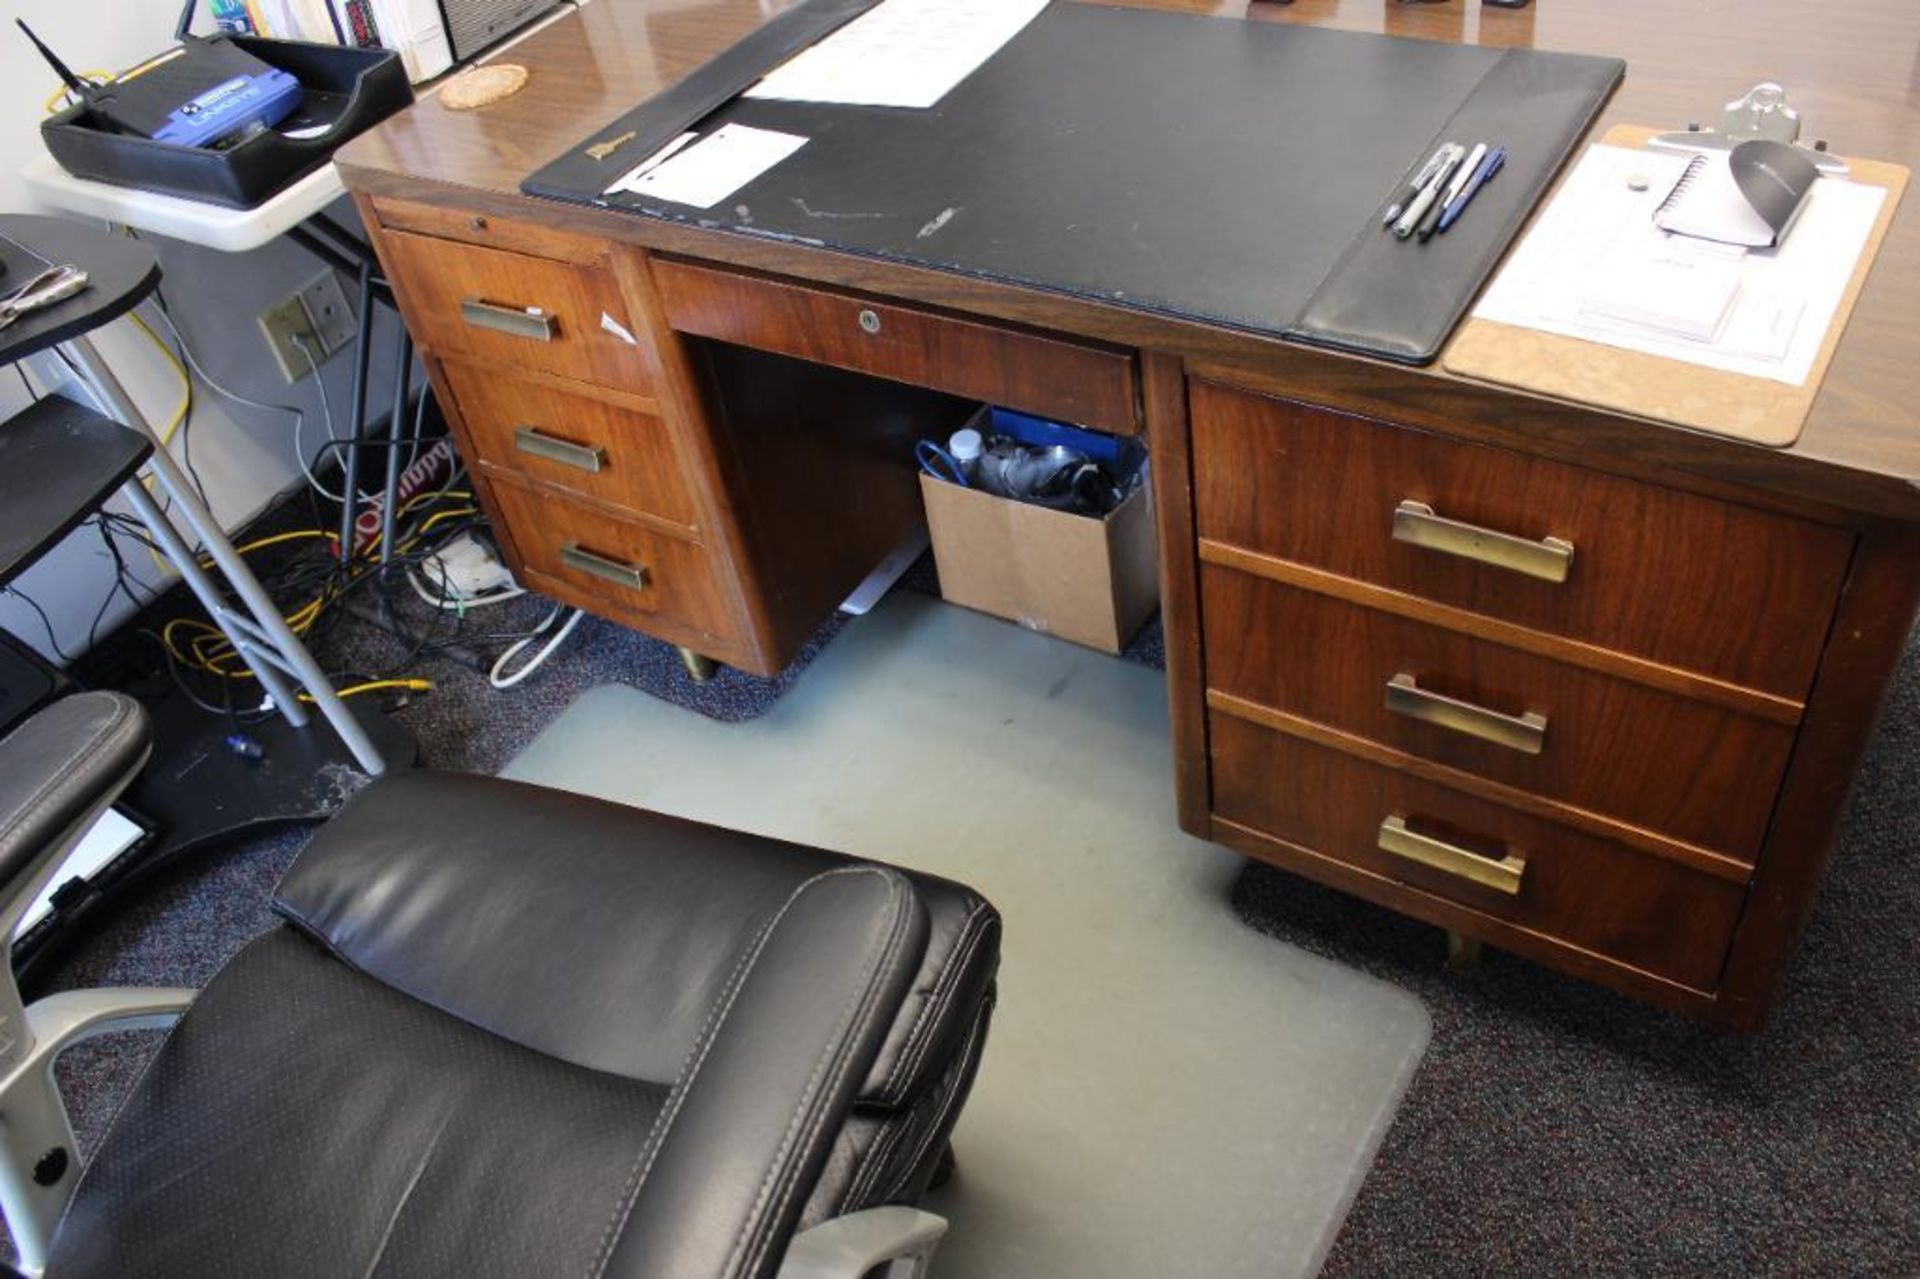 2 offices includes 3 desks, 6 chairs, 2- 4 drawer file cabinets & Dell monitors - Image 6 of 10